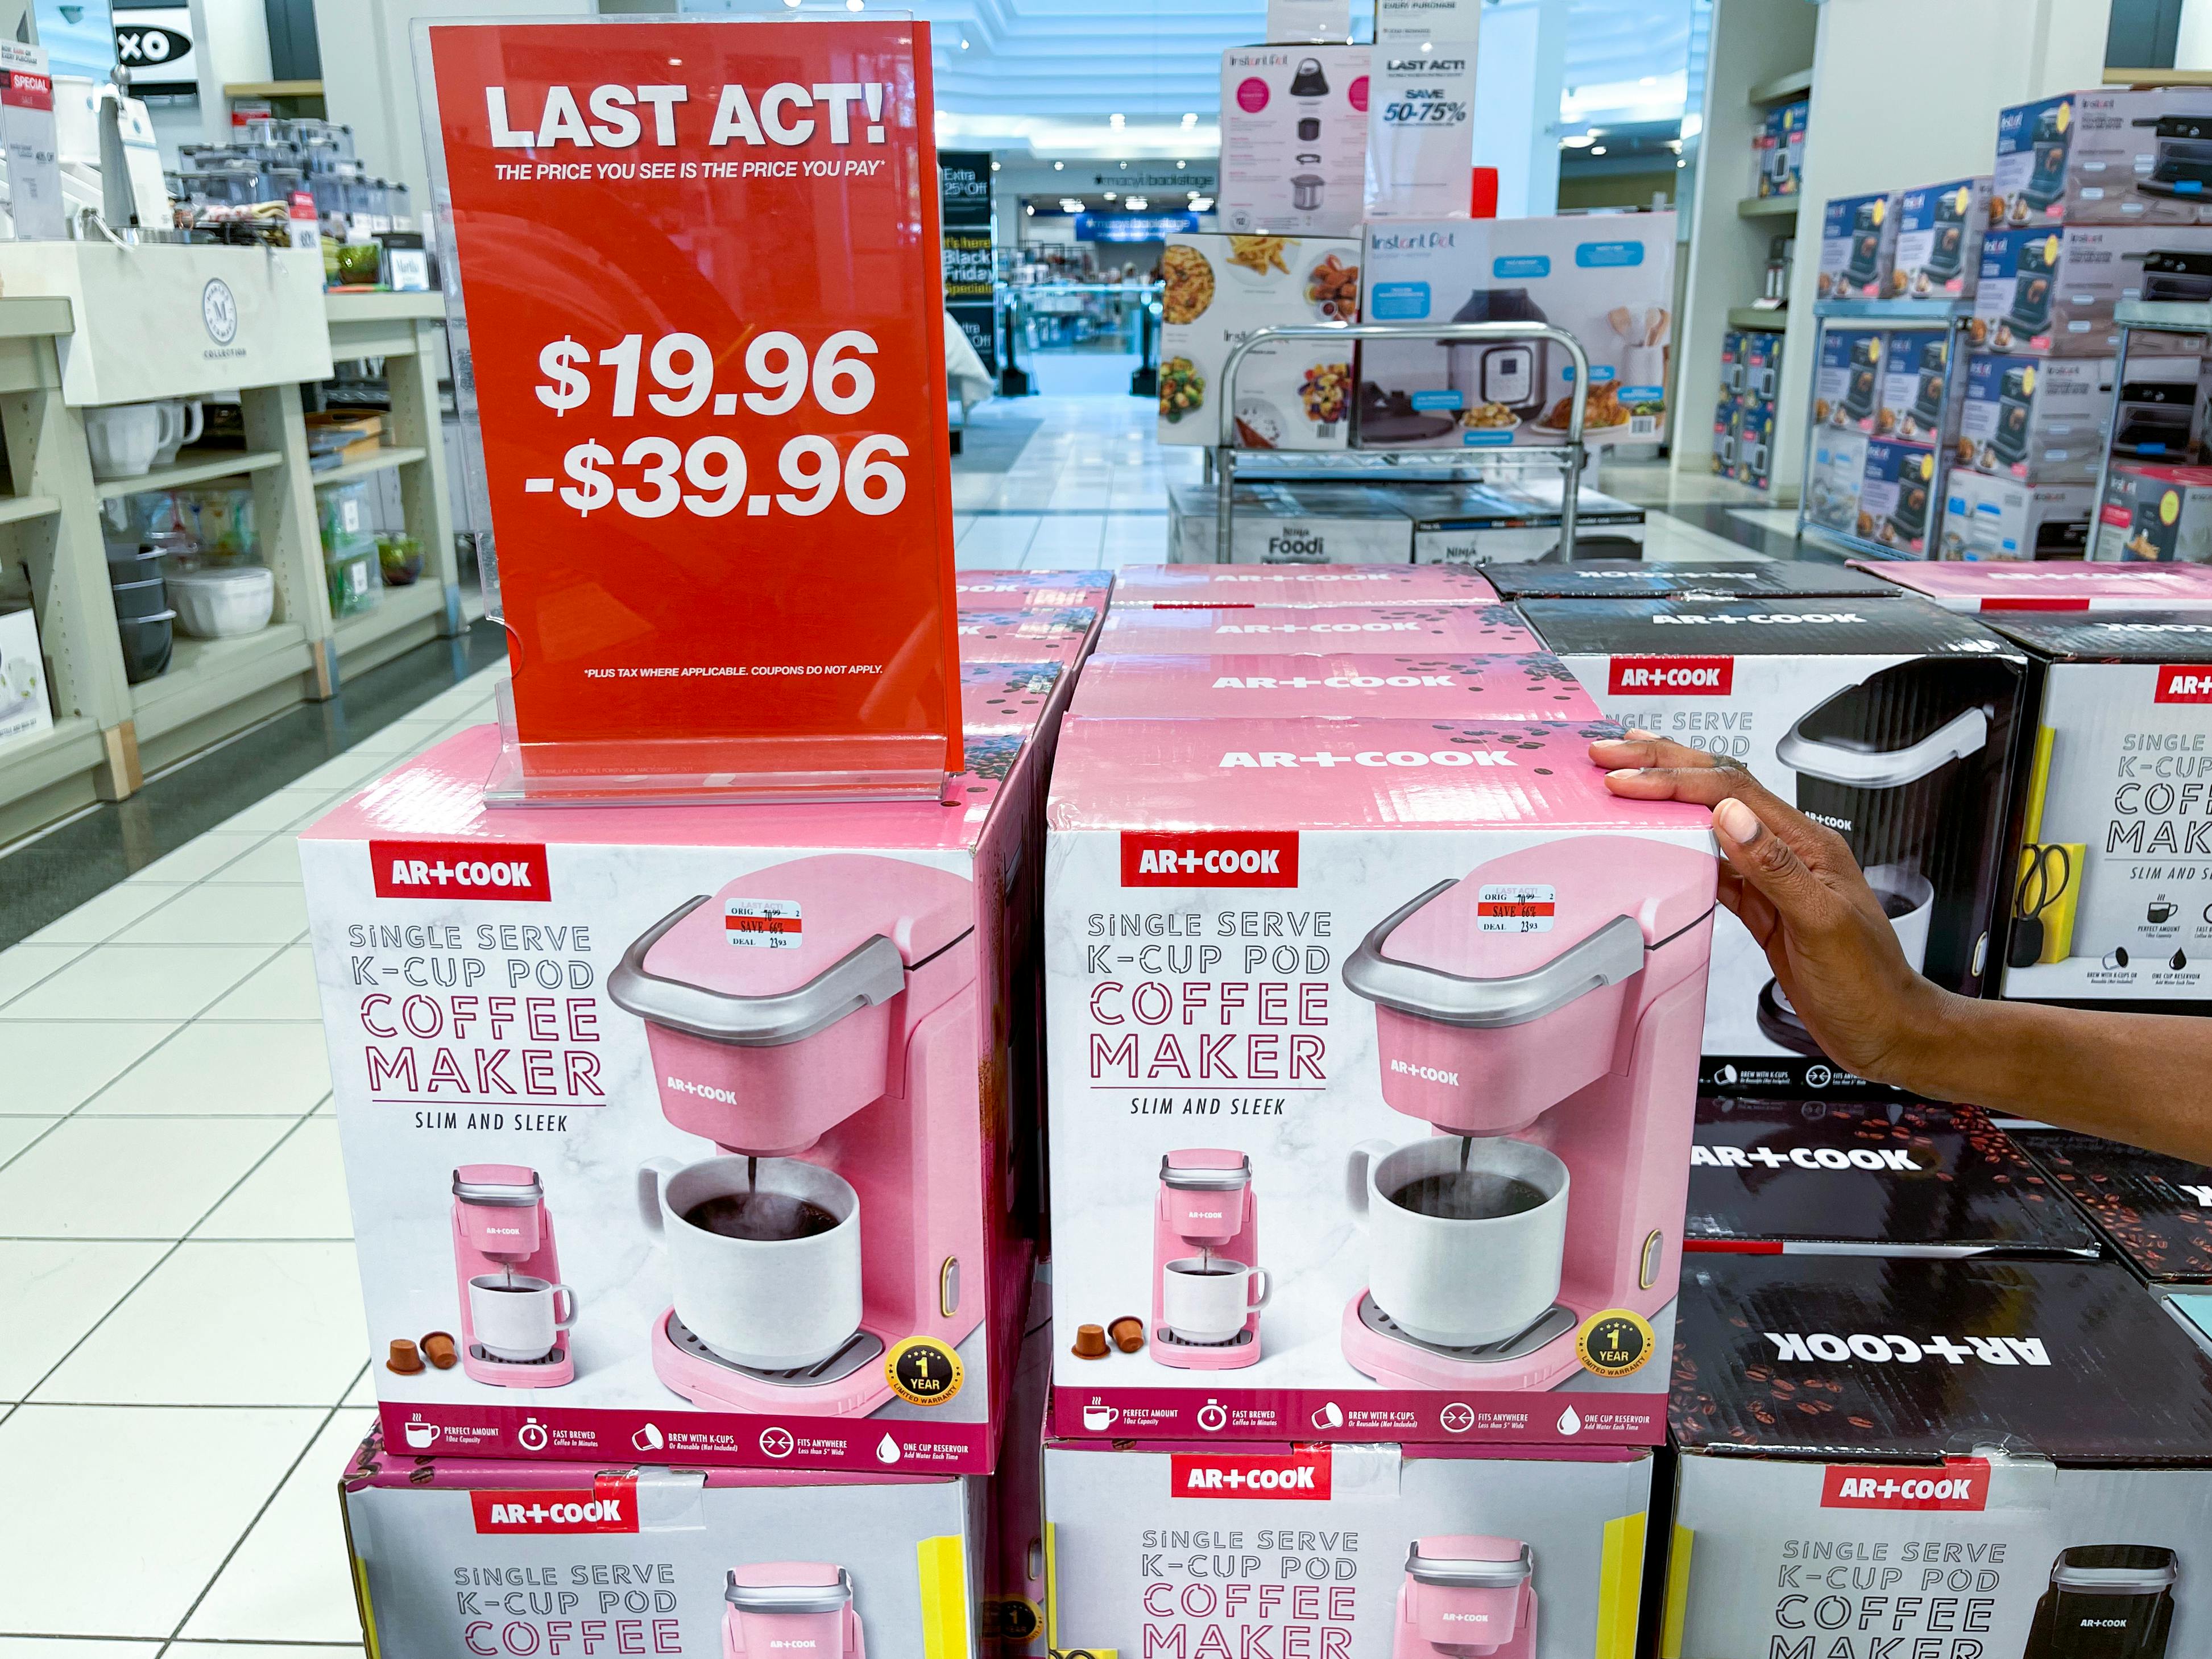 coffee makers stacked up at macy's with a sign that says LAST ACT!